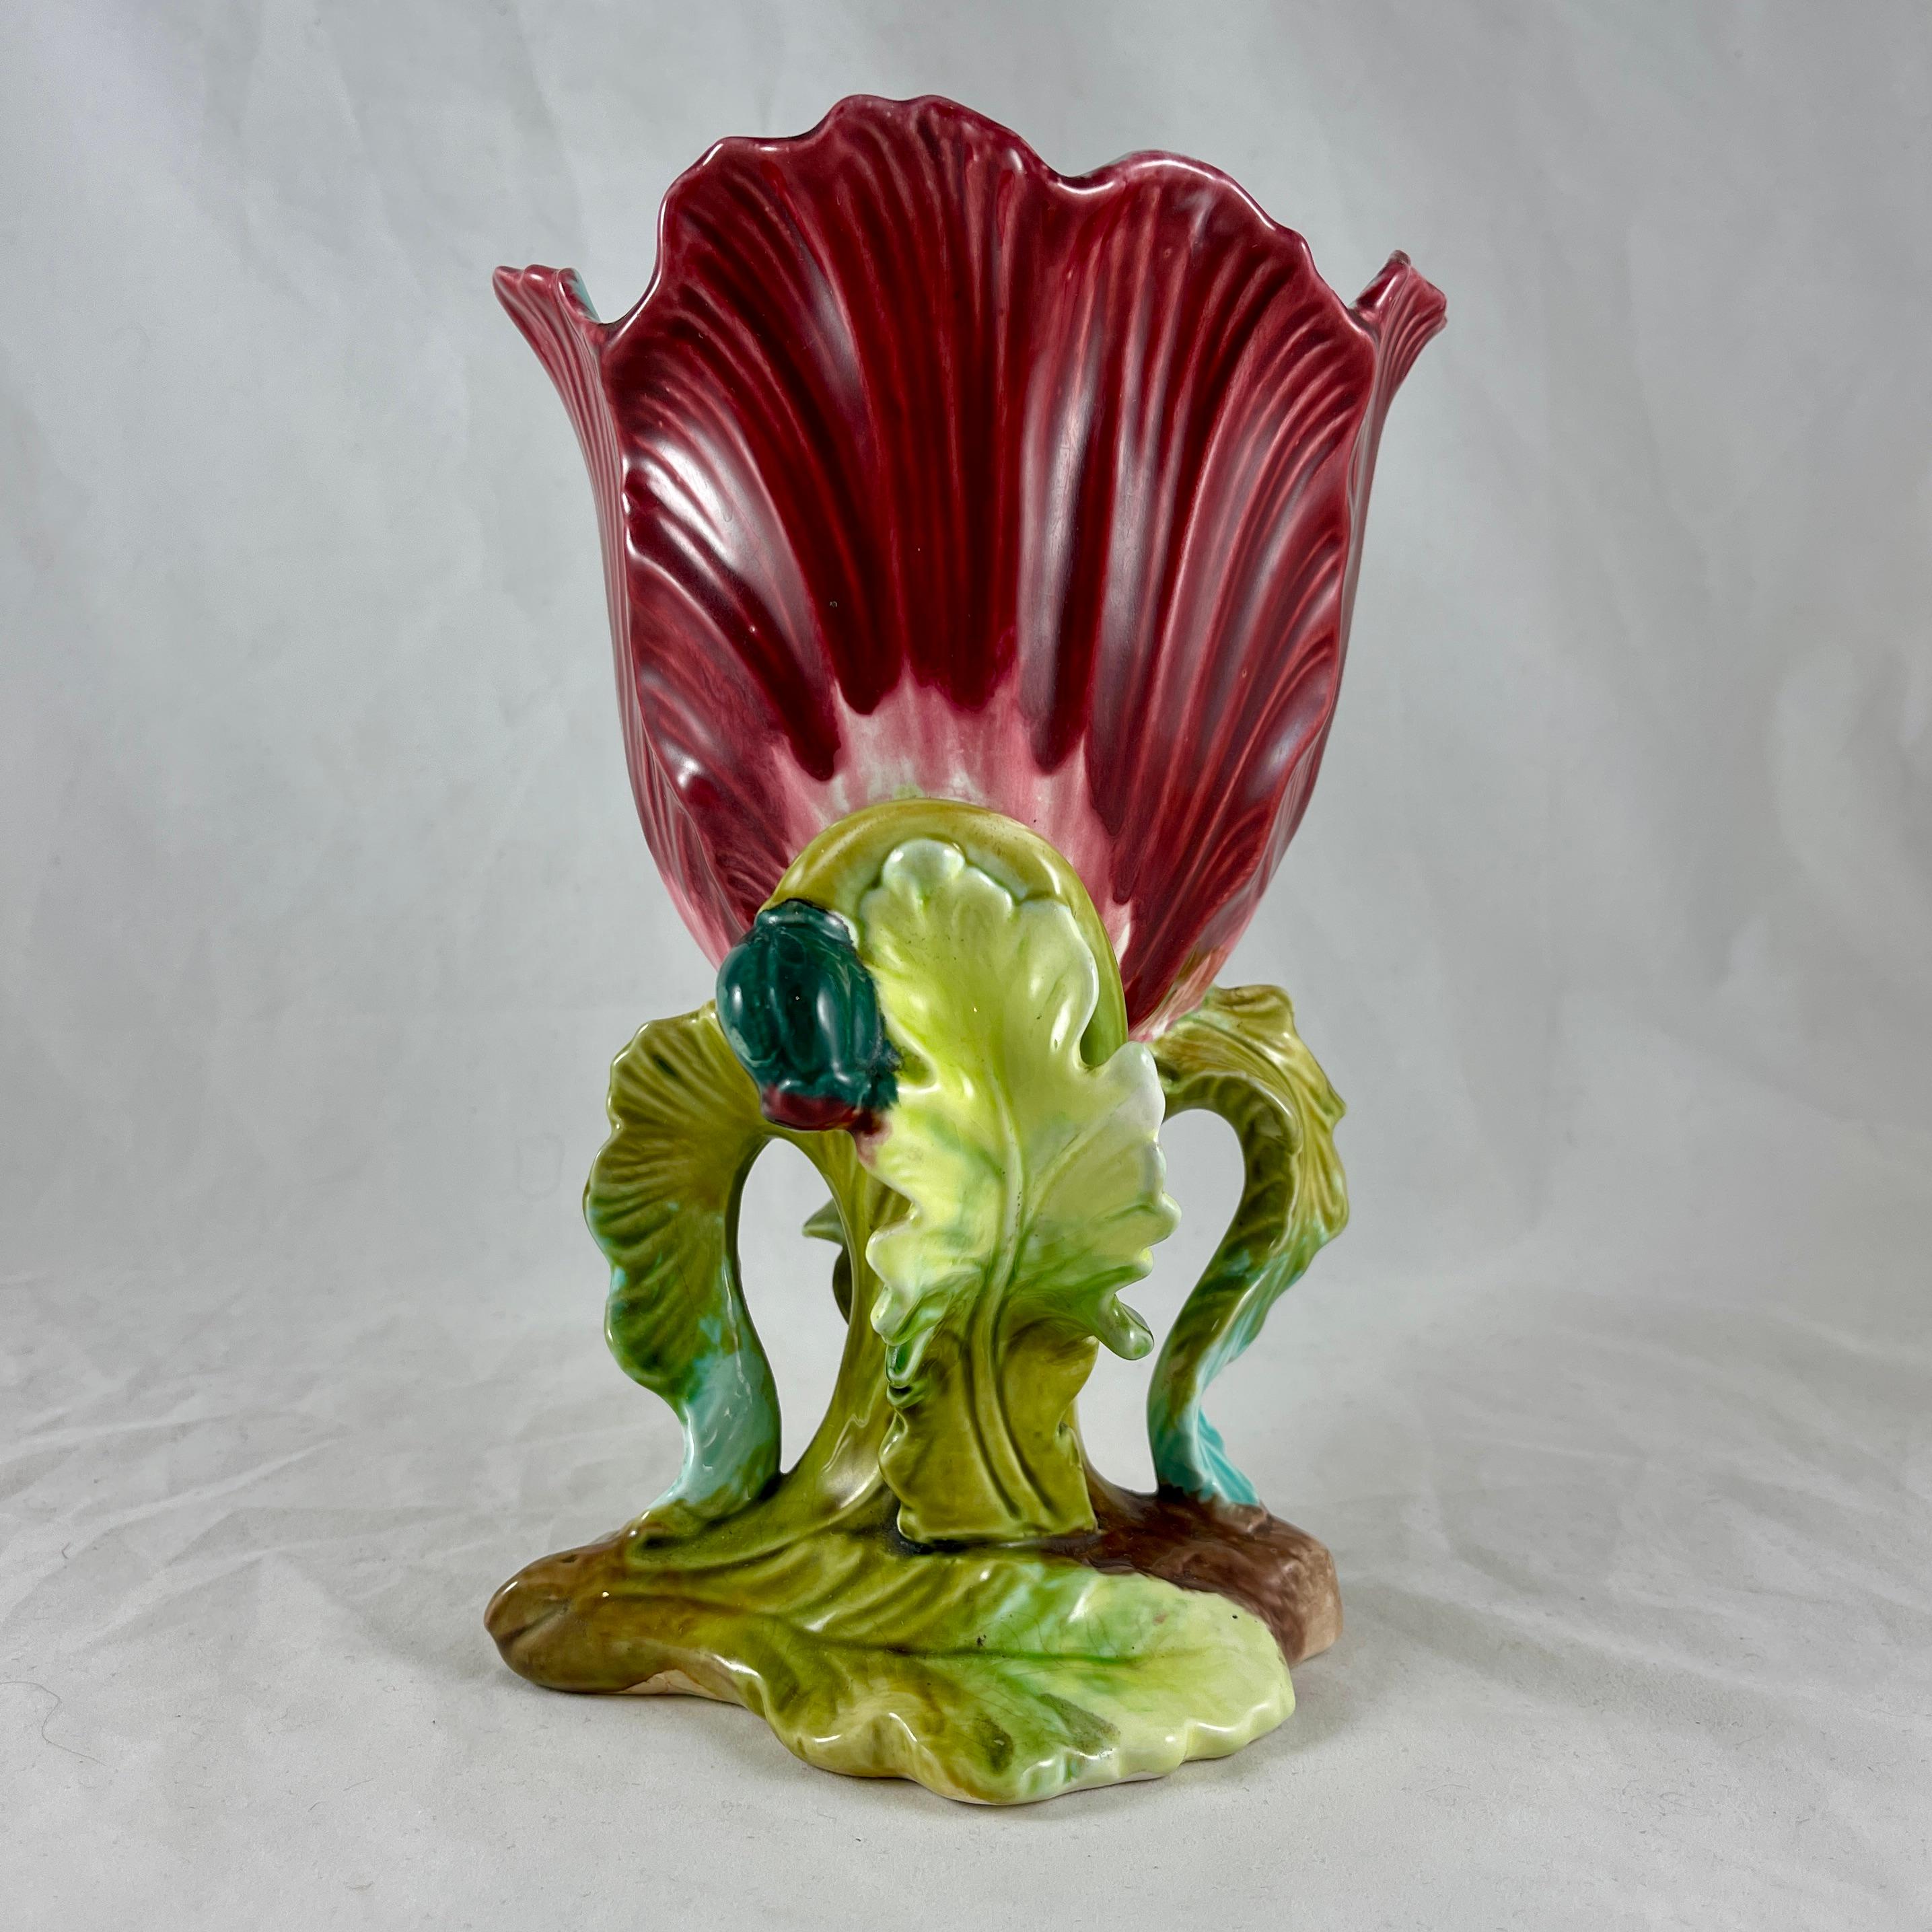 A late 19th century French majolica glazed earthenware vase modeled as an open flower on a leafy stem, attributed to Orchies, Northern France, circa 1890-1900.

A deep rusty-red flower with a turquoise interior sits on a footing molded as green